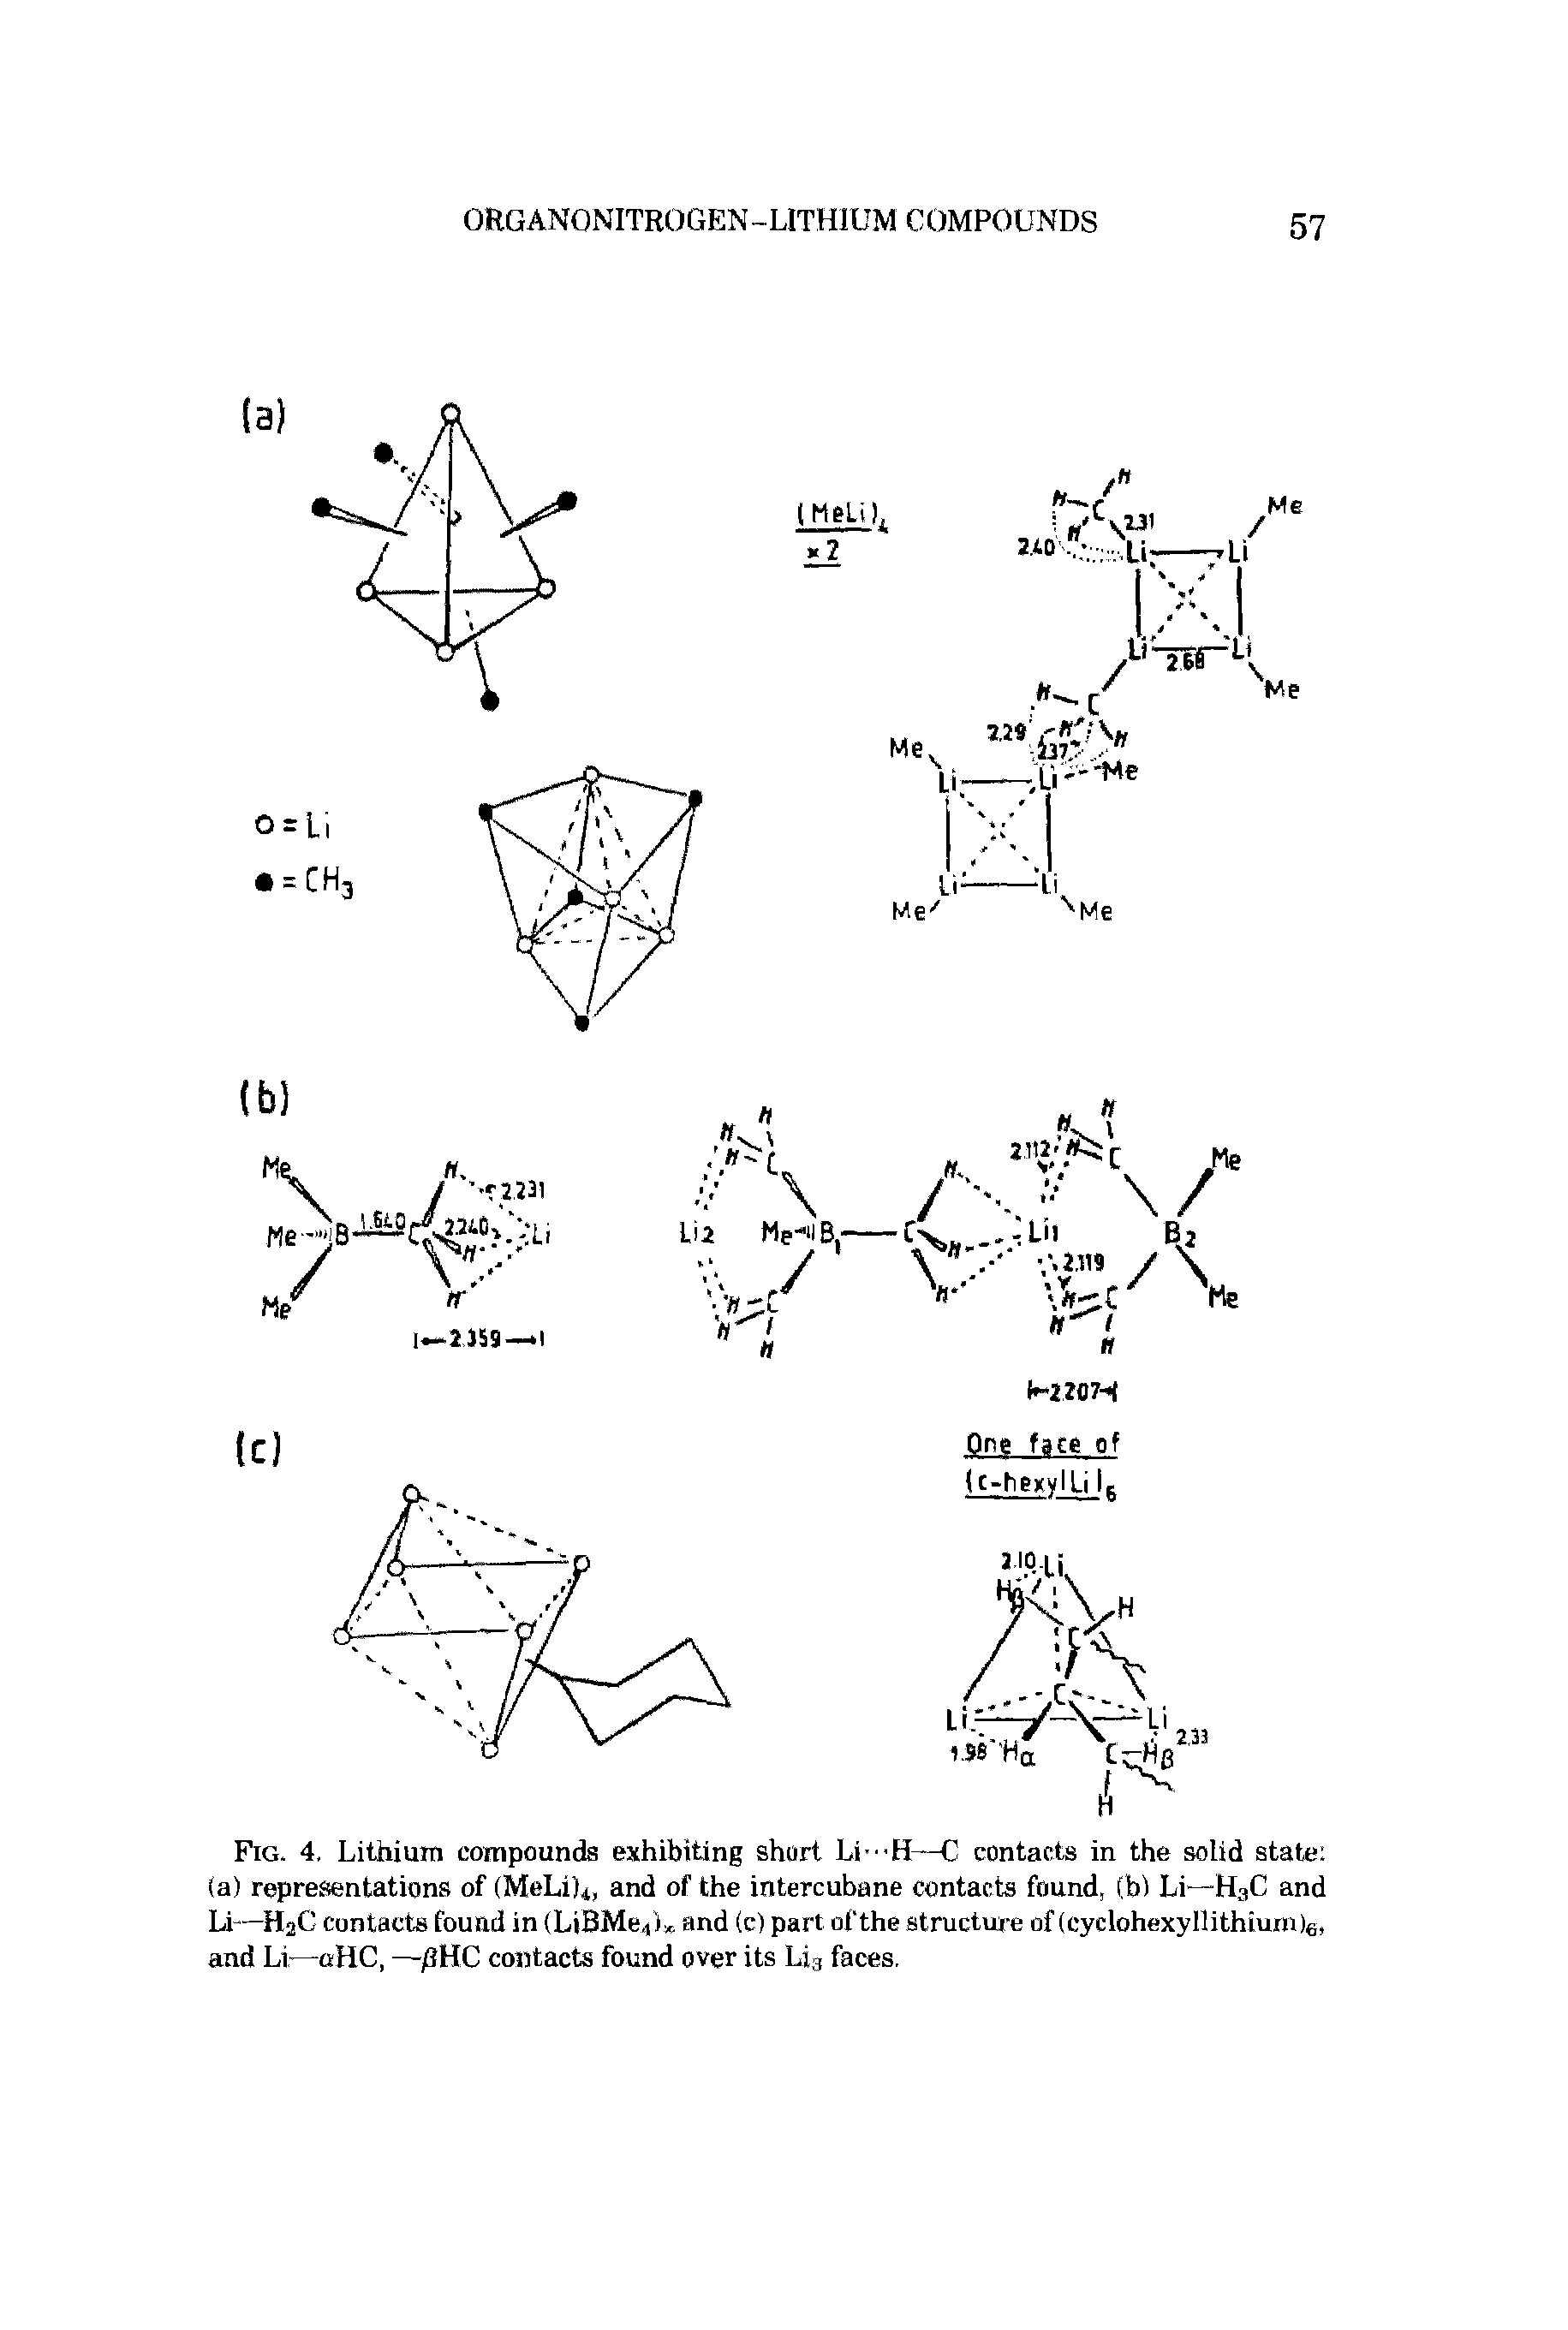 Fig. 4, Lithium compounds exhibiting short Li-H—C contacts in the solid state (a) representations of (MeLiL, and of the intercubane contacts found, (b) Li—H3C and Li—HjC contacts found in (LiBMe,i, and (c) part of the structure of (cyclohexyllithium)6, and Li—oHC, —ffHC contacts found over its li3 faces.